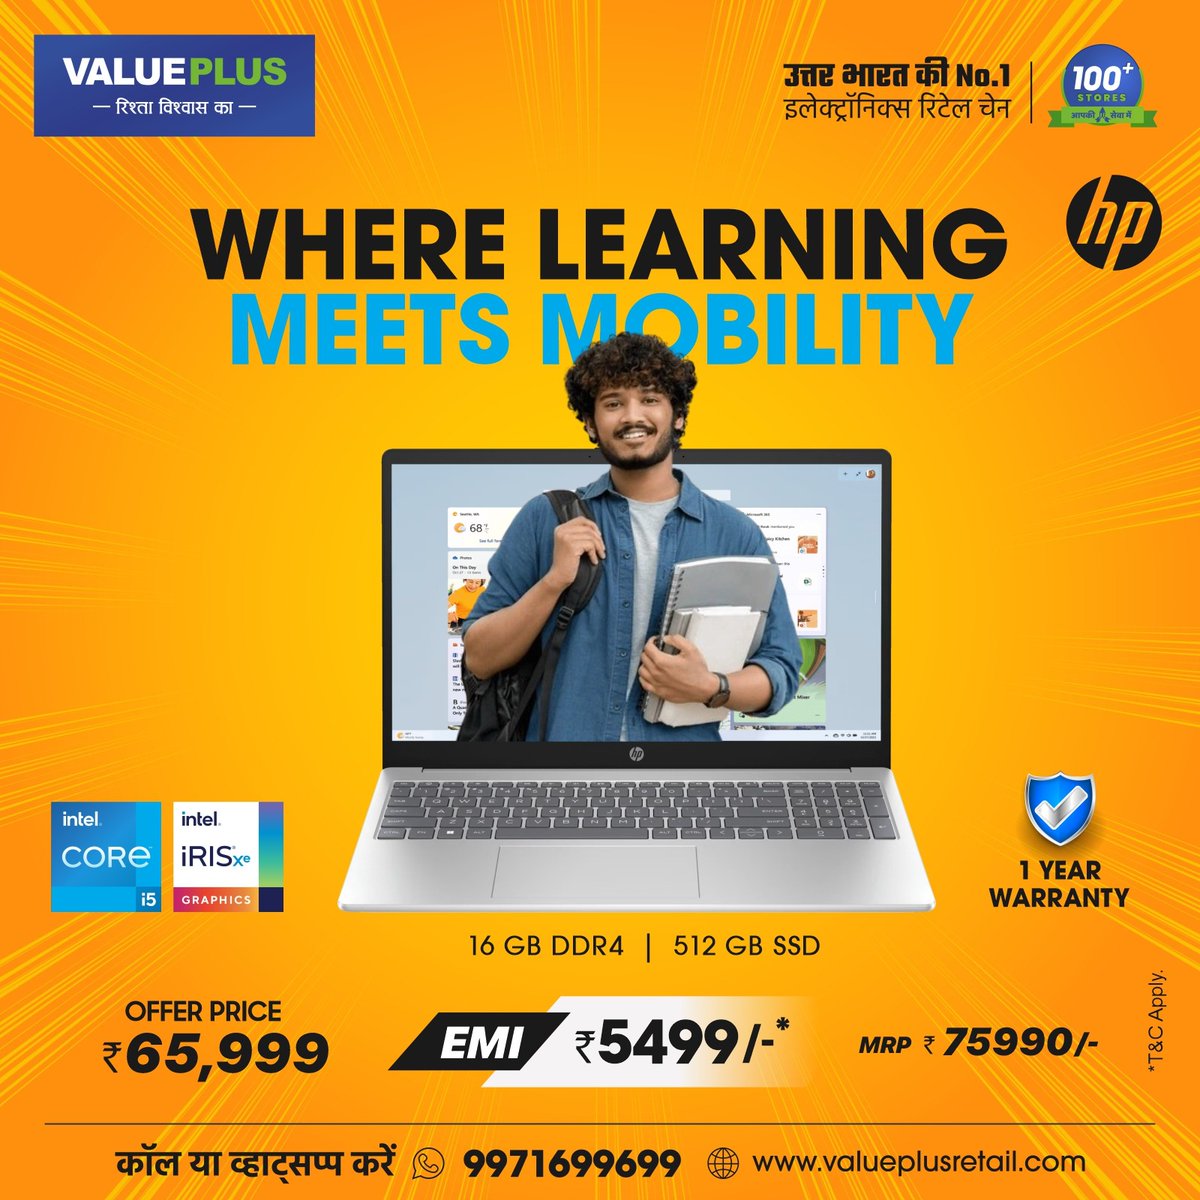 Struggling to juggle classes, assignments, and staying connected?

HP Laptops with Smart Learning features are here to revolutionize your student life! 🤩😎
Buy Now

Visit your nearest Value Plus store.
Call 9971699699.
Visit valueplusretail.com

#Valueplus #hplaptop